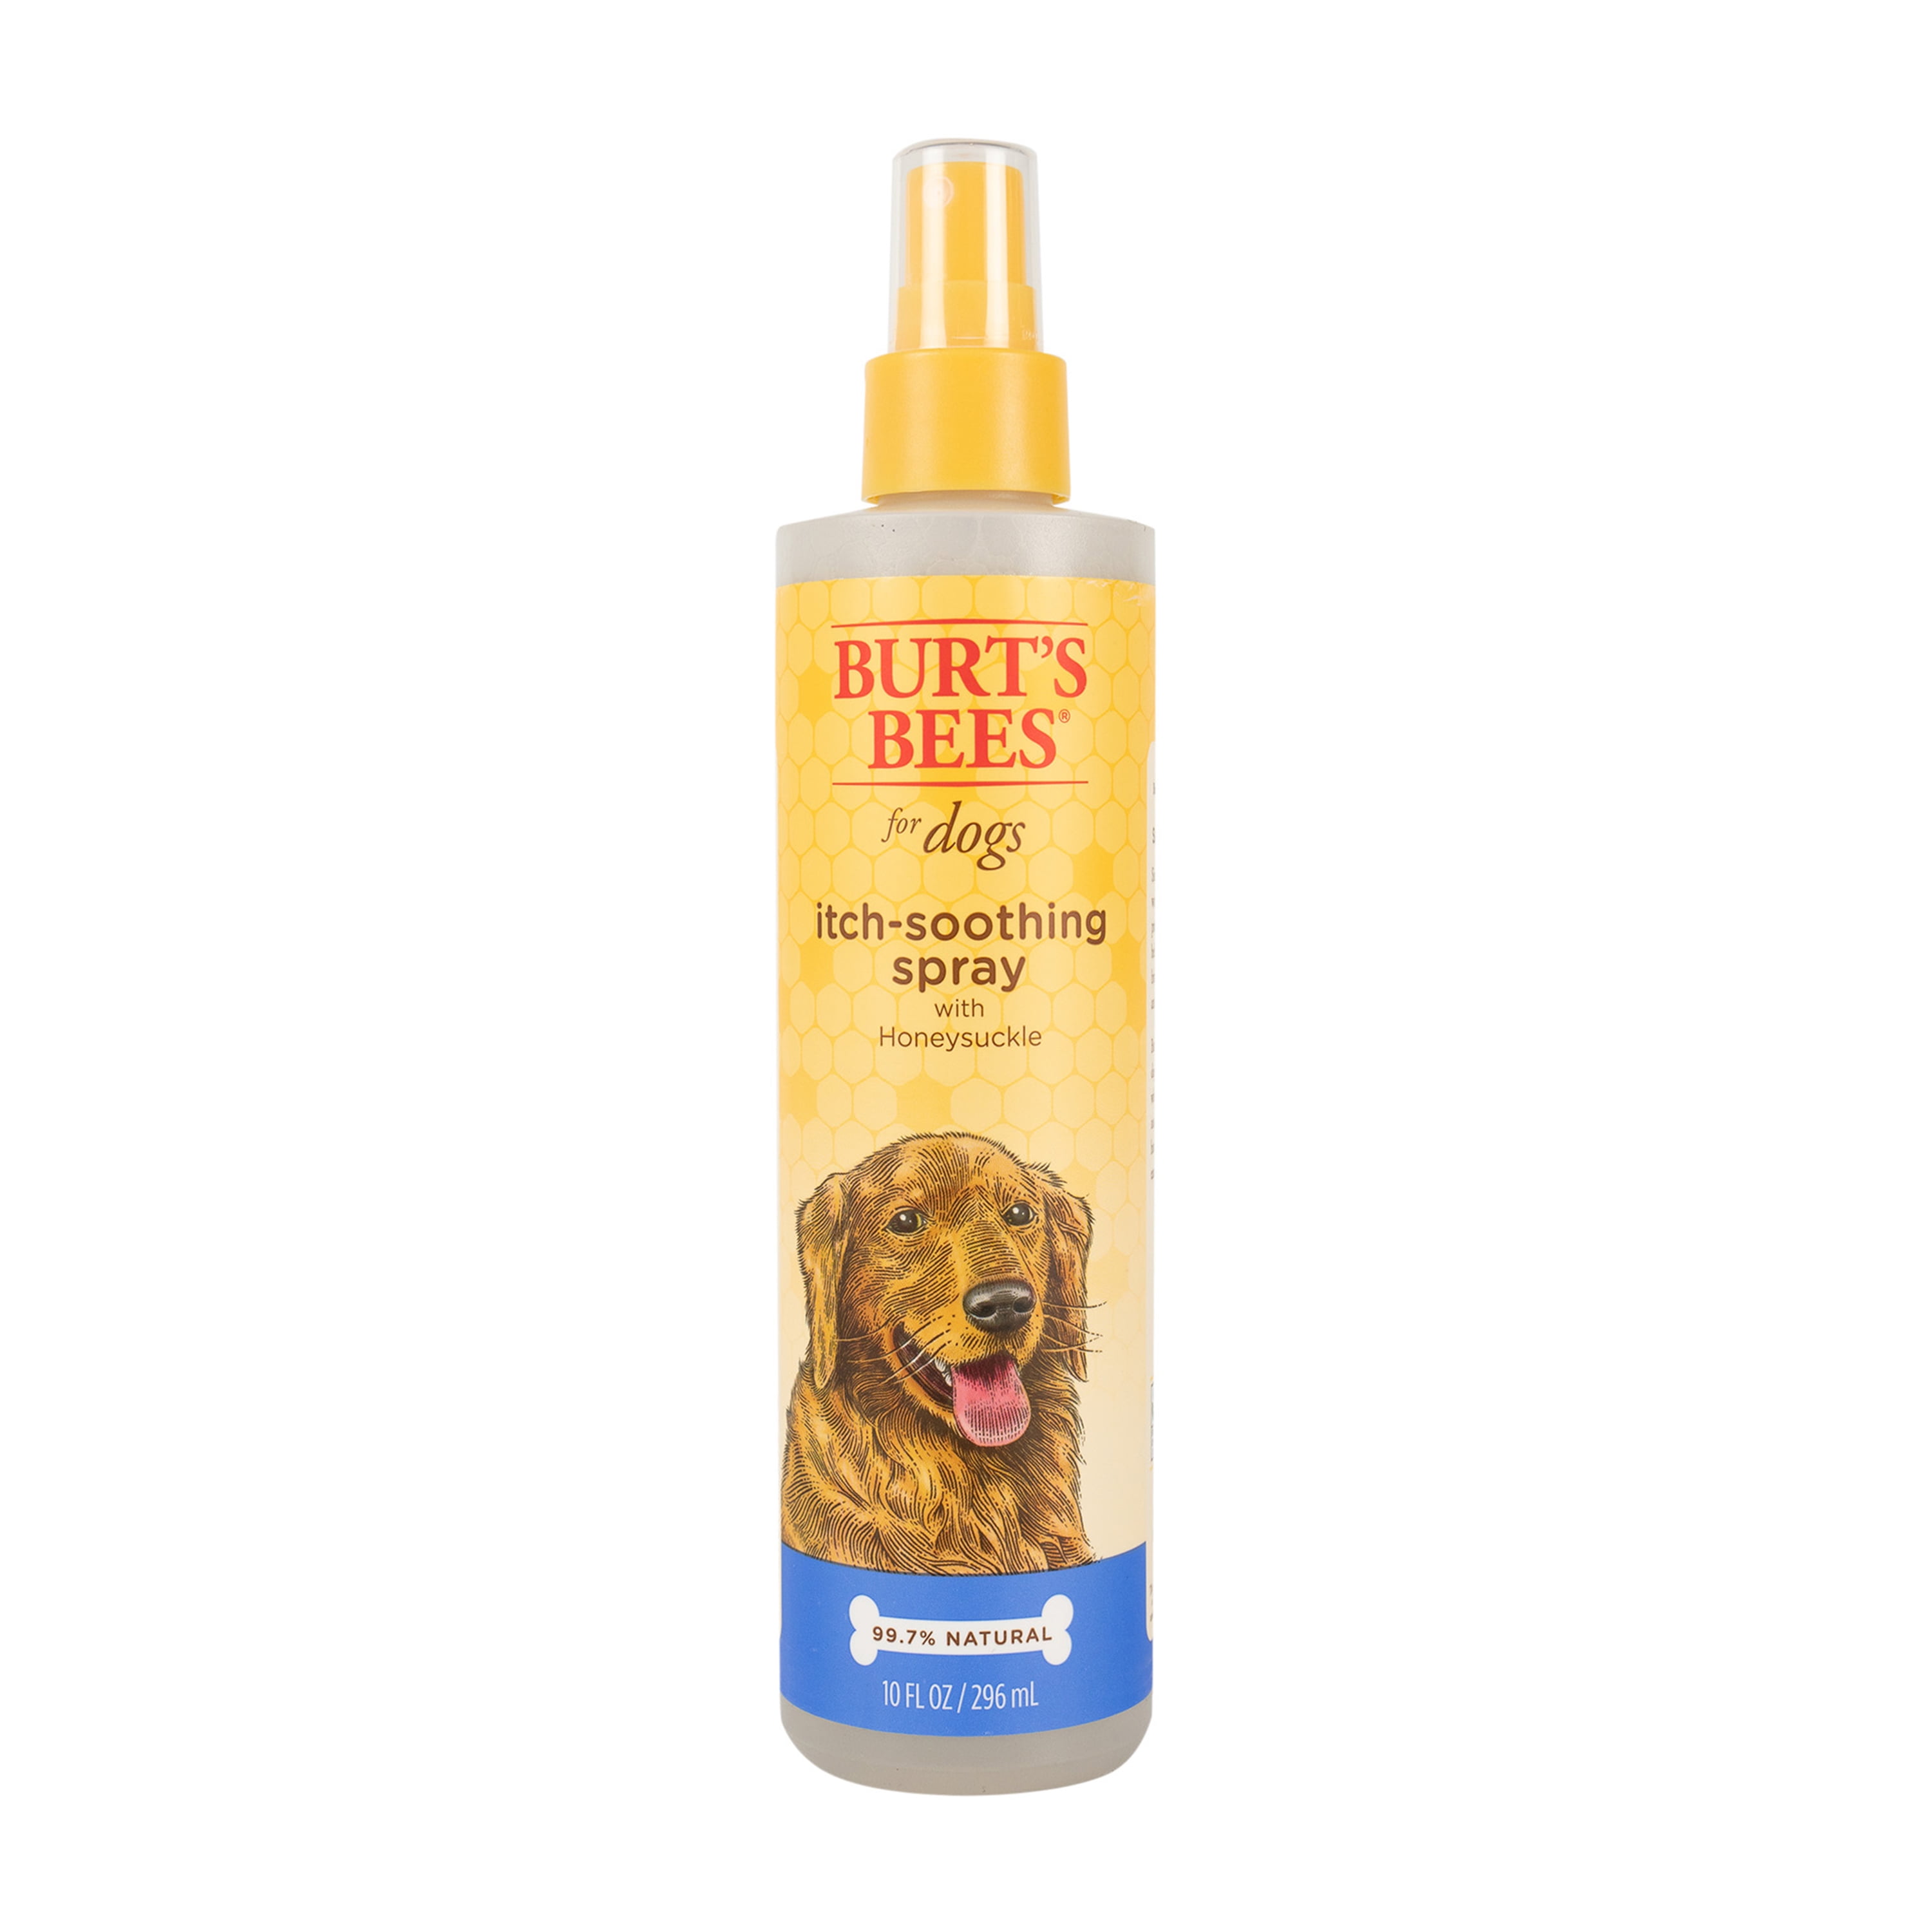 Burt's Bees Natural Pet Care Dog and Puppy Anti-Itch Spray, 10 oz.